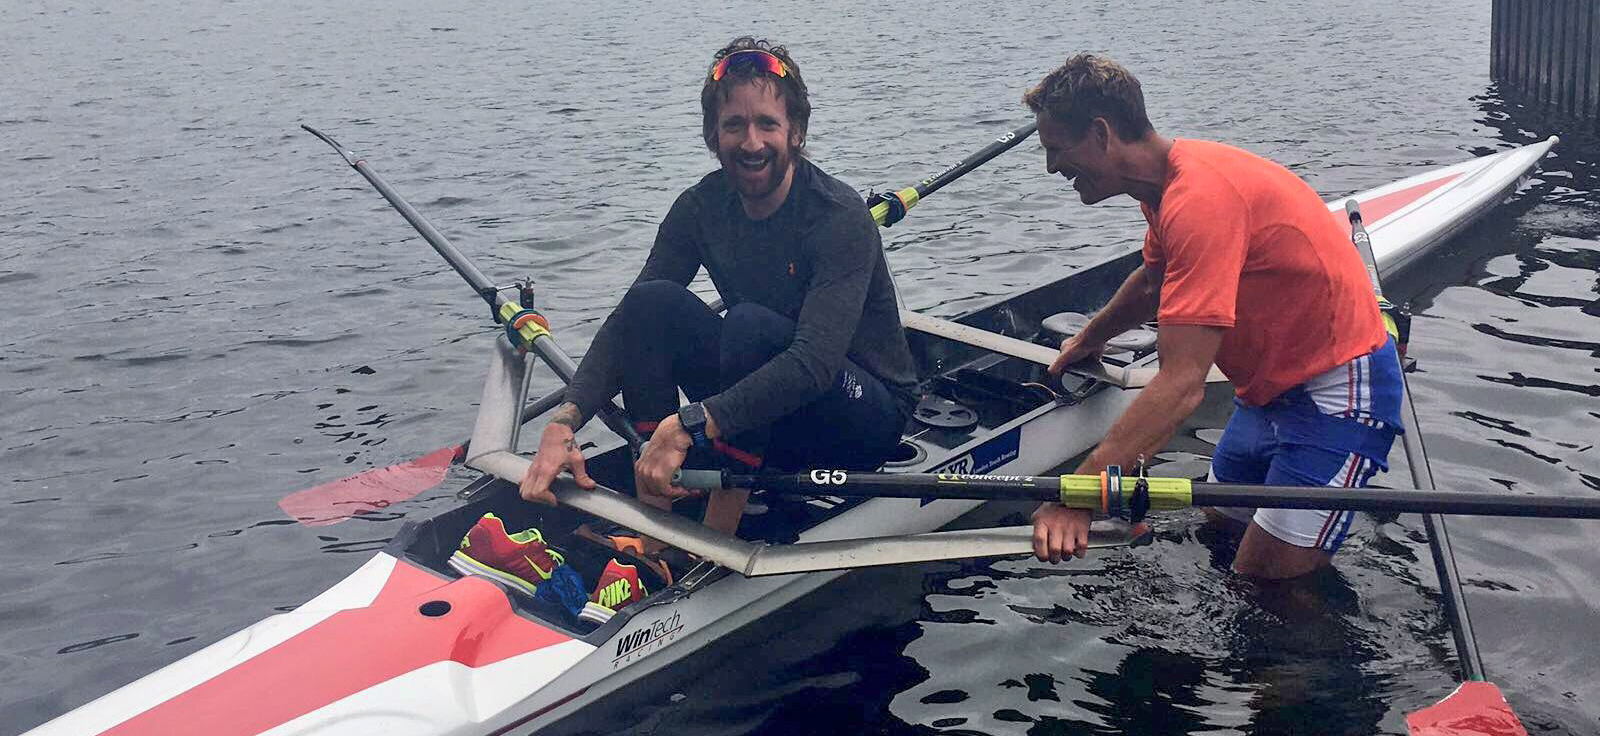 Bradley Wiggins with James Cracknell in a double scull